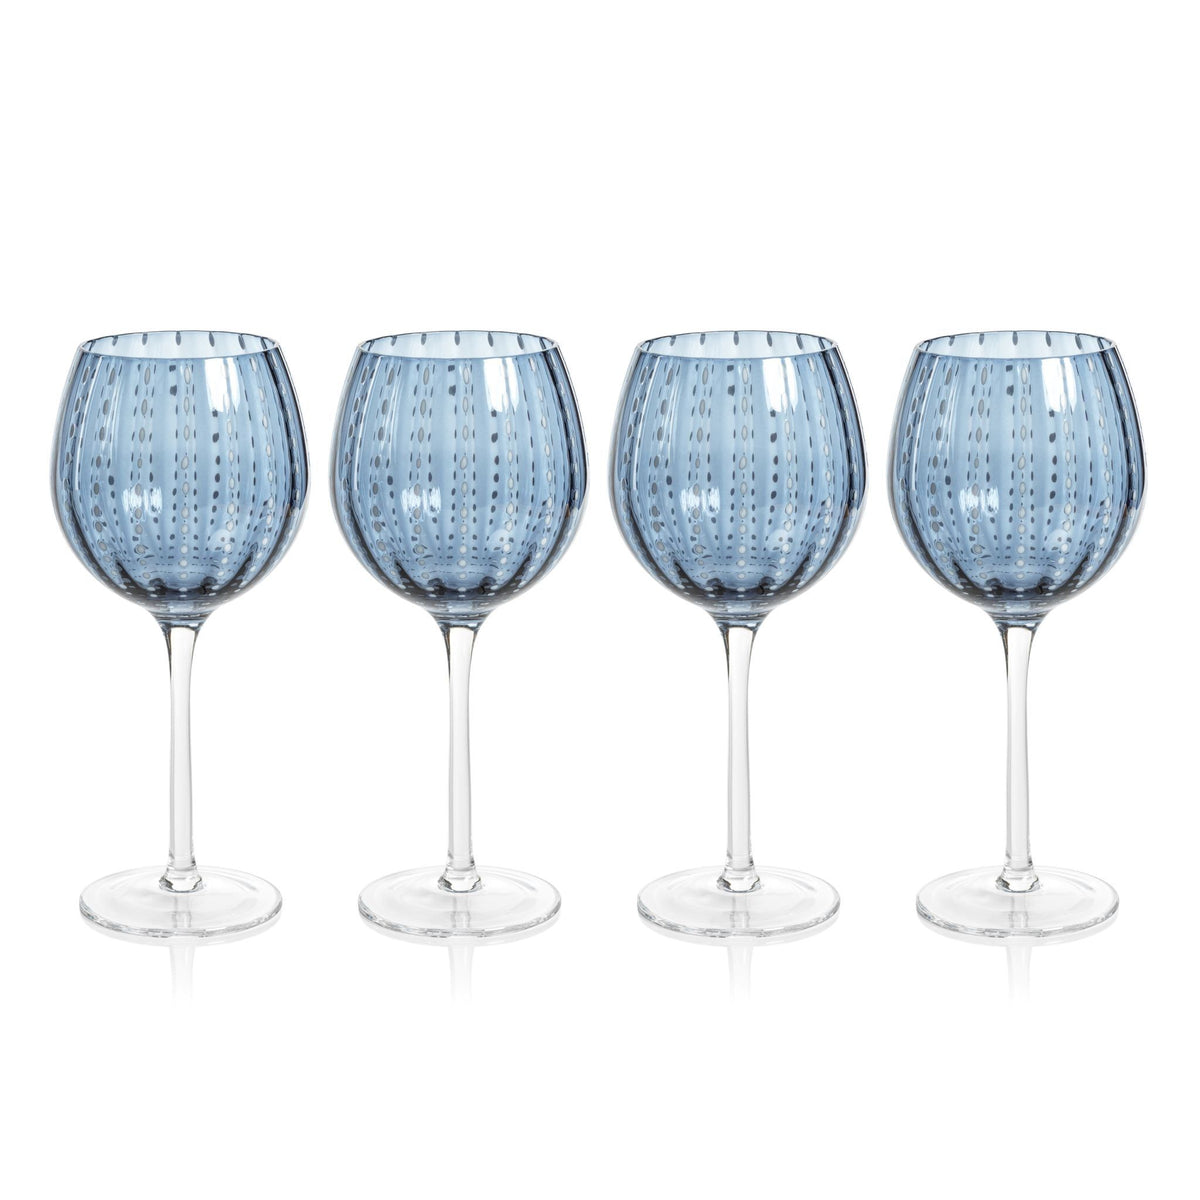 https://www.shopmarcsus.shop/wp-content/uploads/1700/06/looking-for-a-pescara-white-dot-wine-glasses-set-of-4-zodax-price-to-buy-purchase-now-before-they-are-gone_3.jpg